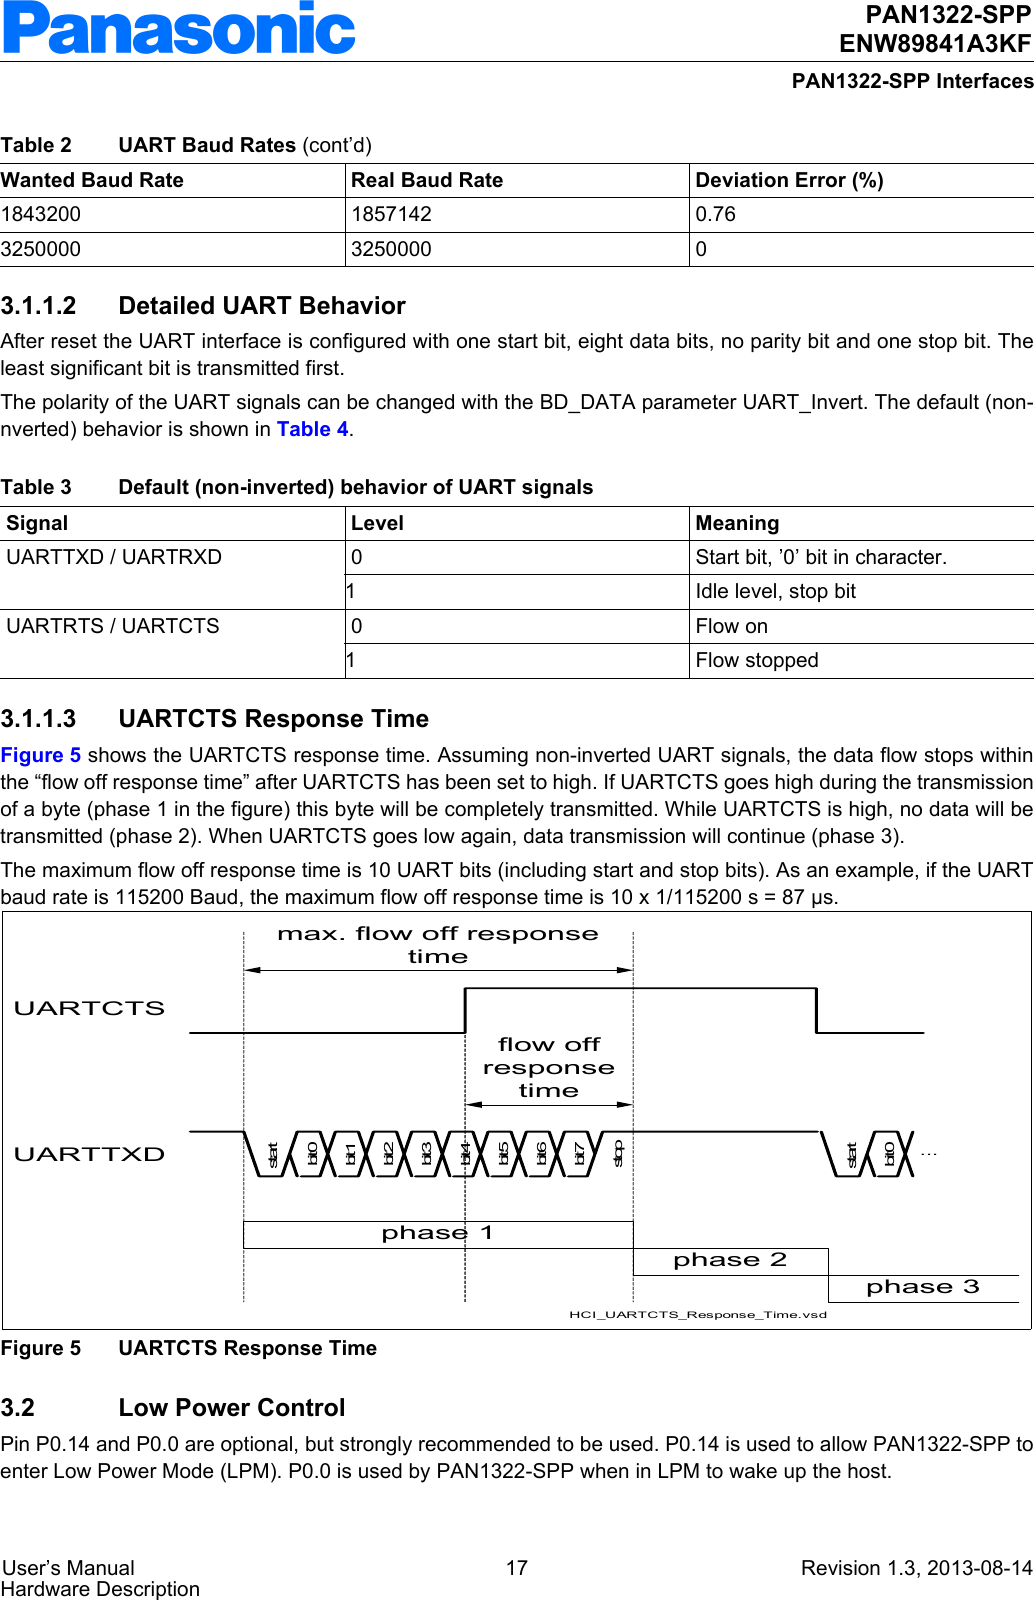  User’s Manual 17 Revision 1.3, 2013-08-14Hardware Description PAN1322-SPPENW89841A3KFPAN1322-SPP Interfaces3.1.1.2 Detailed UART BehaviorAfter reset the UART interface is configured with one start bit, eight data bits, no parity bit and one stop bit. The least significant bit is transmitted first.The polarity of the UART signals can be changed with the BD_DATA parameter UART_Invert. The default (non-nverted) behavior is shown in Table 4.0Start bit, ’0’ bit in character.Idle level, stop bit0Flow onFlow stopped3.1.1.3 UARTCTS Response TimeFigure 5 shows the UARTCTS response time. Assuming non-inverted UART signals, the data flow stops within the “flow off response time” after UARTCTS has been set to high. If UARTCTS goes high during the transmission of a byte (phase 1 in the figure) this byte will be completely transmitted. While UARTCTS is high, no data will be transmitted (phase 2). When UARTCTS goes low again, data transmission will continue (phase 3).The maximum flow off response time is 10 UART bits (including start and stop bits). As an example, if the UART baud rate is 115200 Baud, the maximum flow off response time is 10 x 1/115200 s = 87 µs.HCI_UARTCTS_Response_Time.vsdUARTCTSUARTTXDbi t 0bi t 1bi t 2bi t 3bi t 4bi t 5bi t 6bi t 7startstopbi t 0start...phase 1phase 2phase 3flow offresponsetimemax. flow off responsetimeFigure 5 UARTCTS Response Time3.2 Low Power ControlPin P0.14 and P0.0 are optional, but strongly recommended to be used. P0.14 is used to allow PAN1322-SPP to enter Low Power Mode (LPM). P0.0 is used by PAN1322-SPP when in LPM to wake up the host.1843200 1857142 0.763250000 3250000 0Table 3 Default (non-inverted) behavior of UART signals  Signal Level Meaning UARTTXD / UARTRXD1 UARTRTS / UARTCTS1Table 2 UART Baud Rates (cont’d)Wanted Baud Rate Real Baud Rate Deviation Error (%)